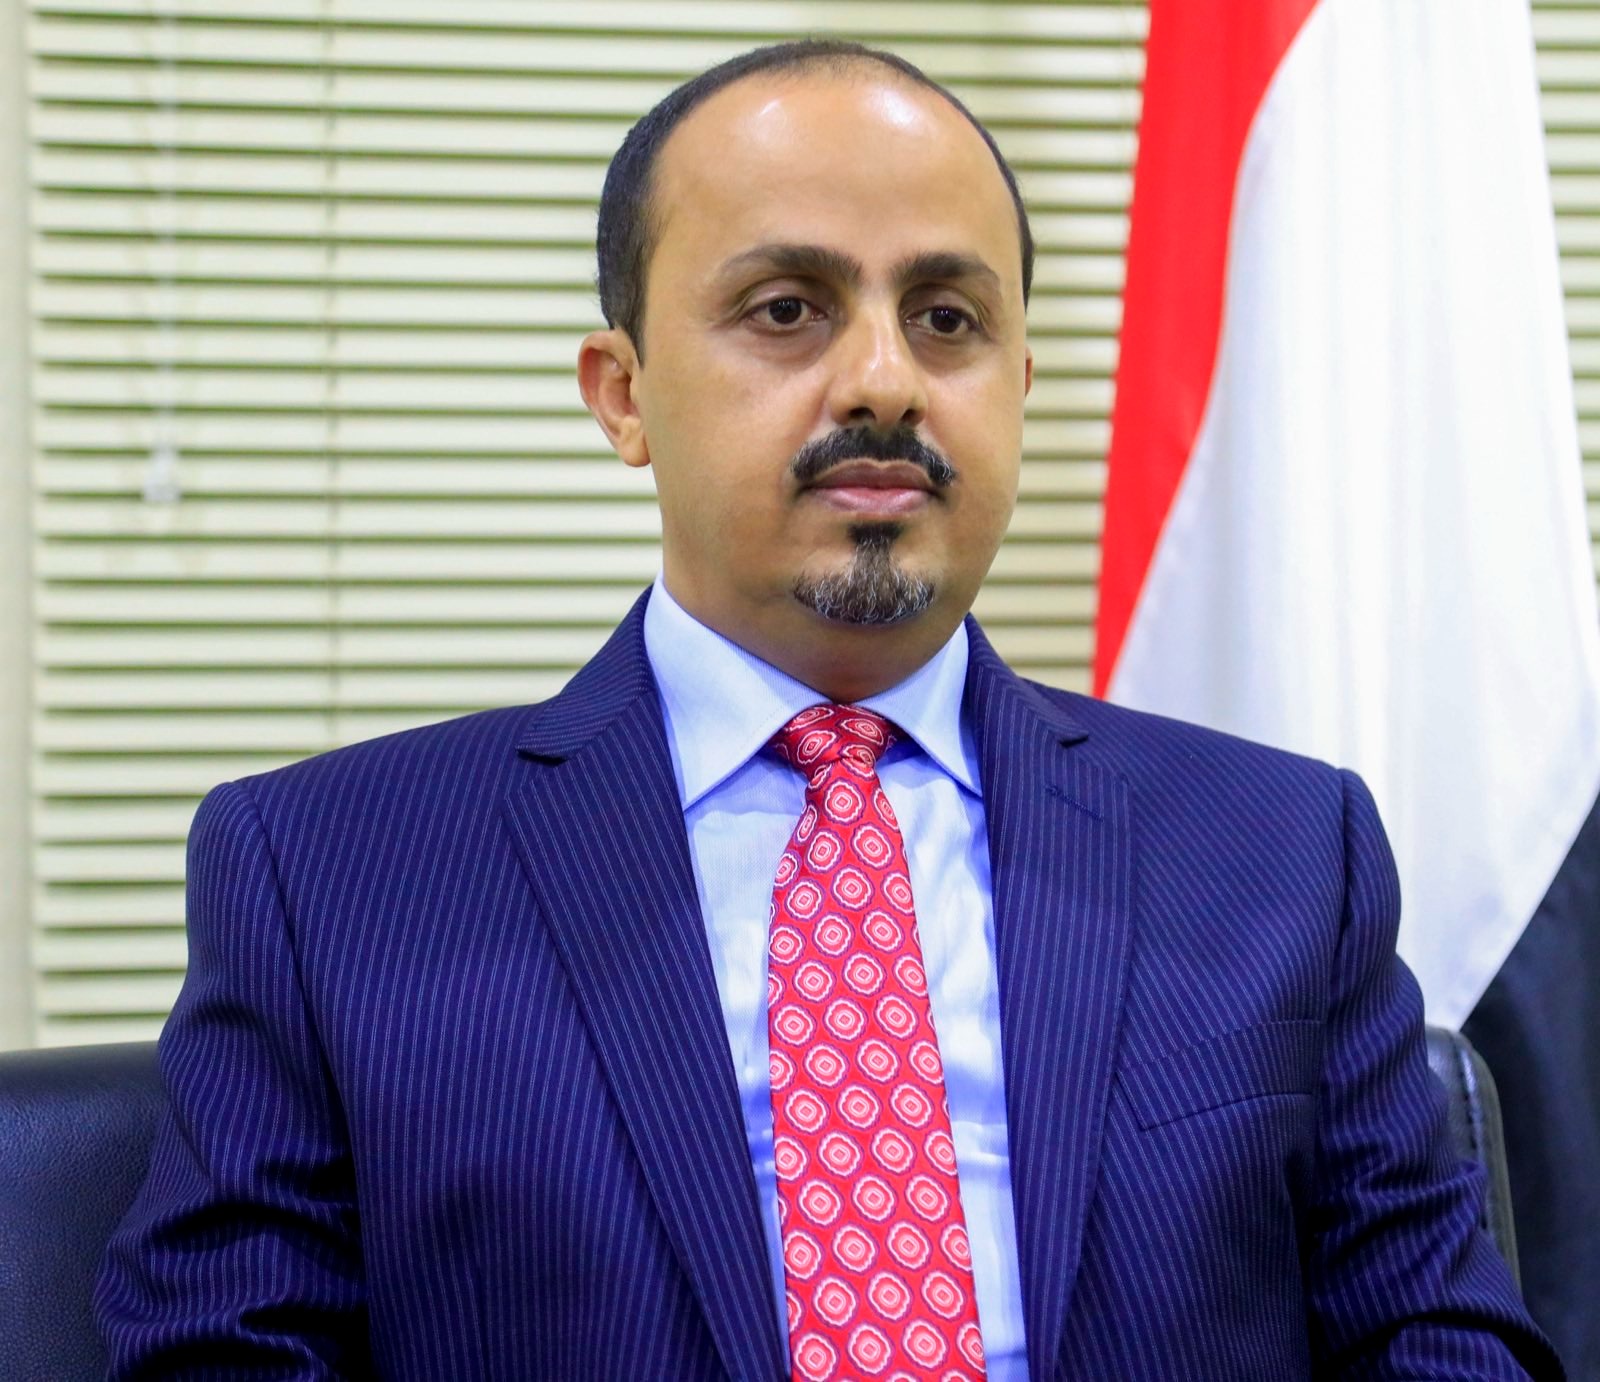 Moammar Al-Eryani, Yemeni minister of information, culture and tourism and a member of the AYC advisory board (photo: Yemeni Ministry of Information)